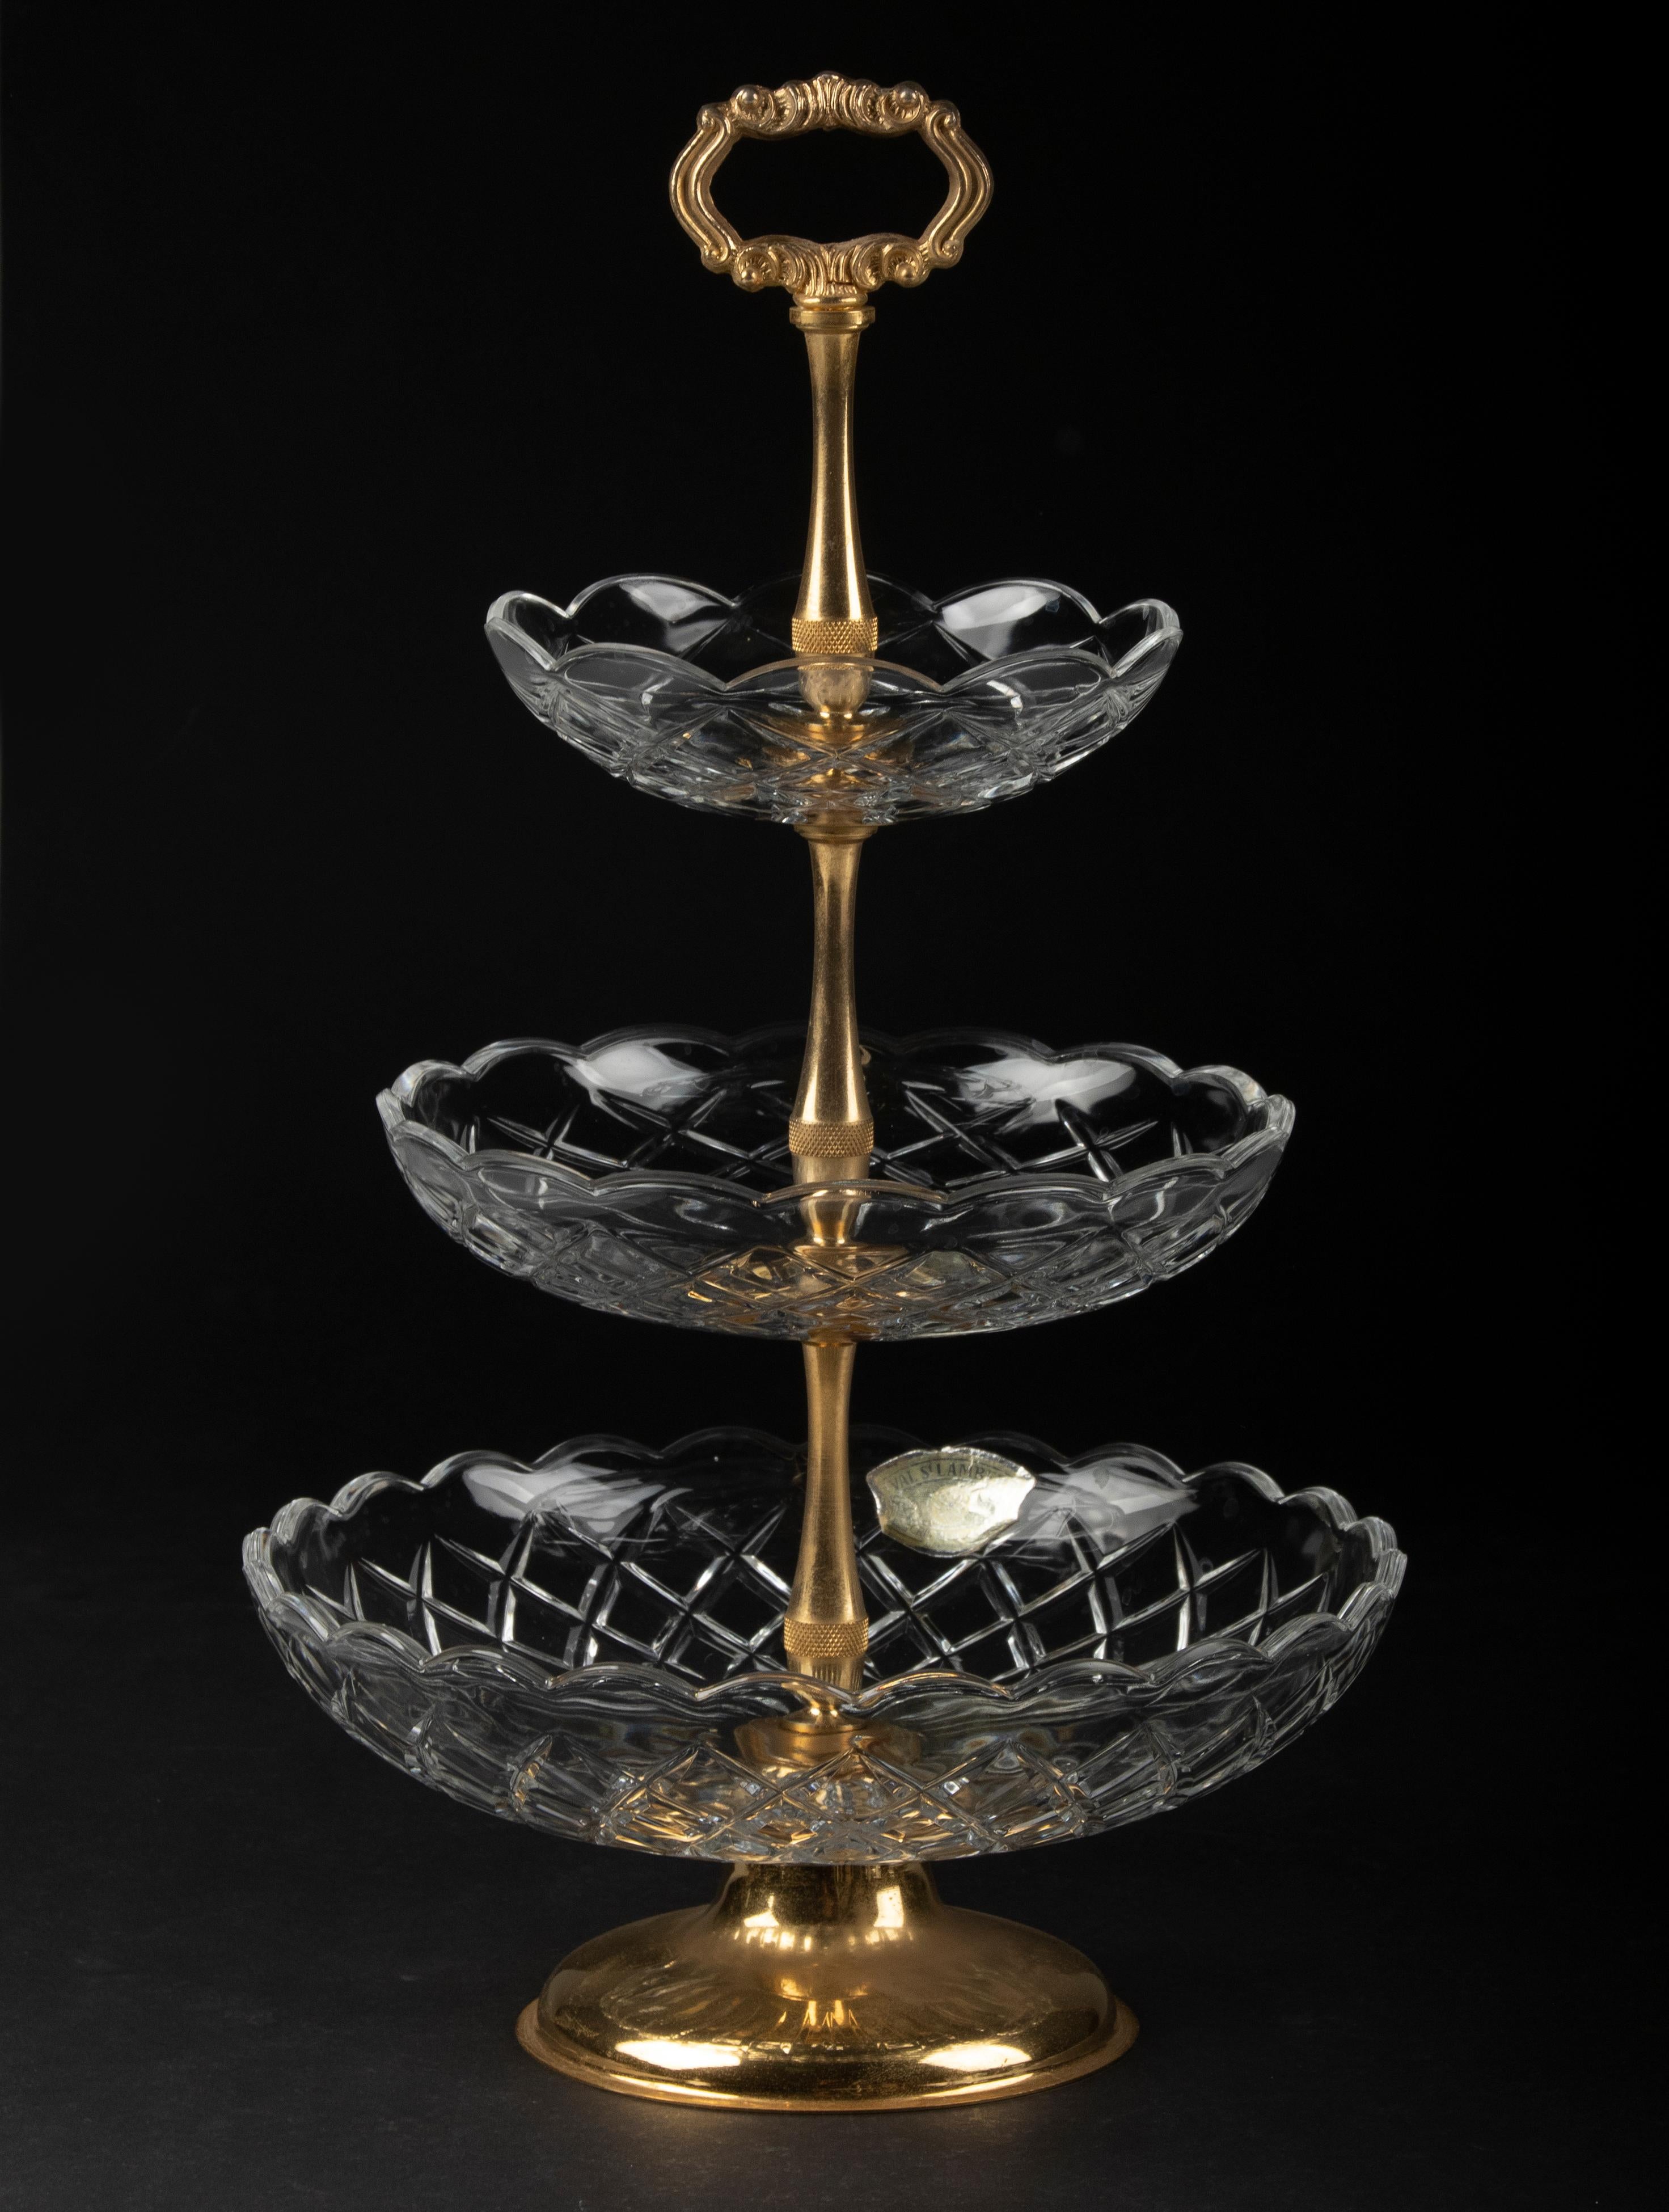 Beautiful crystal 3-layer stand from the Belgian designer Val Saint Lambert. The frame is made of gold-plated metal. The crystal bowls have beautiful cuts with arcs and scalloped edges. The stand dates from circa 1960. In very good condition.